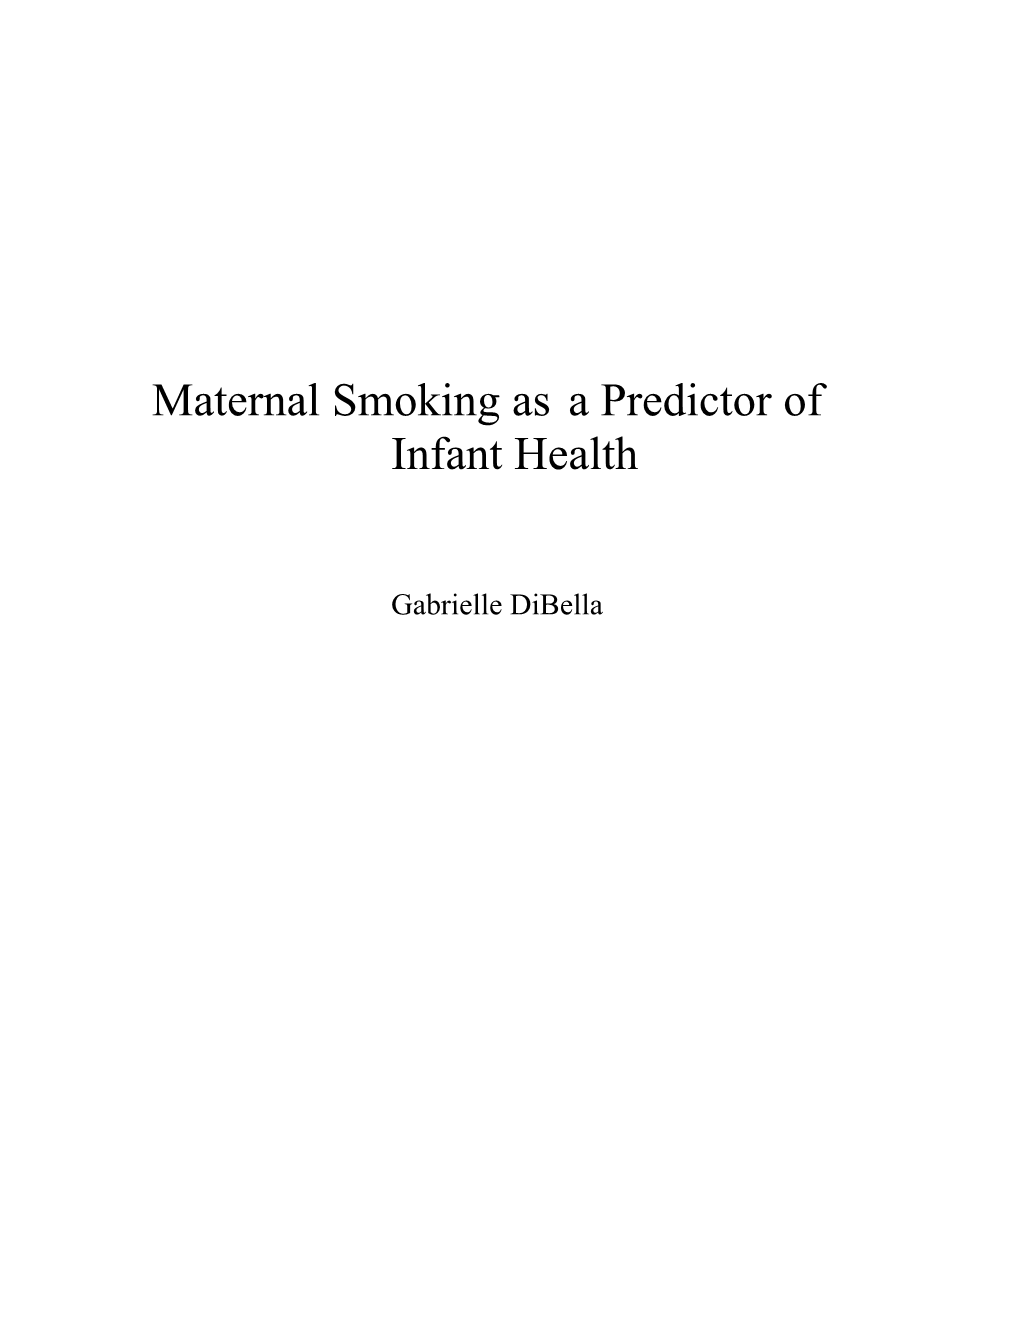 Maternal Smoking As a Predictor of Infant Health